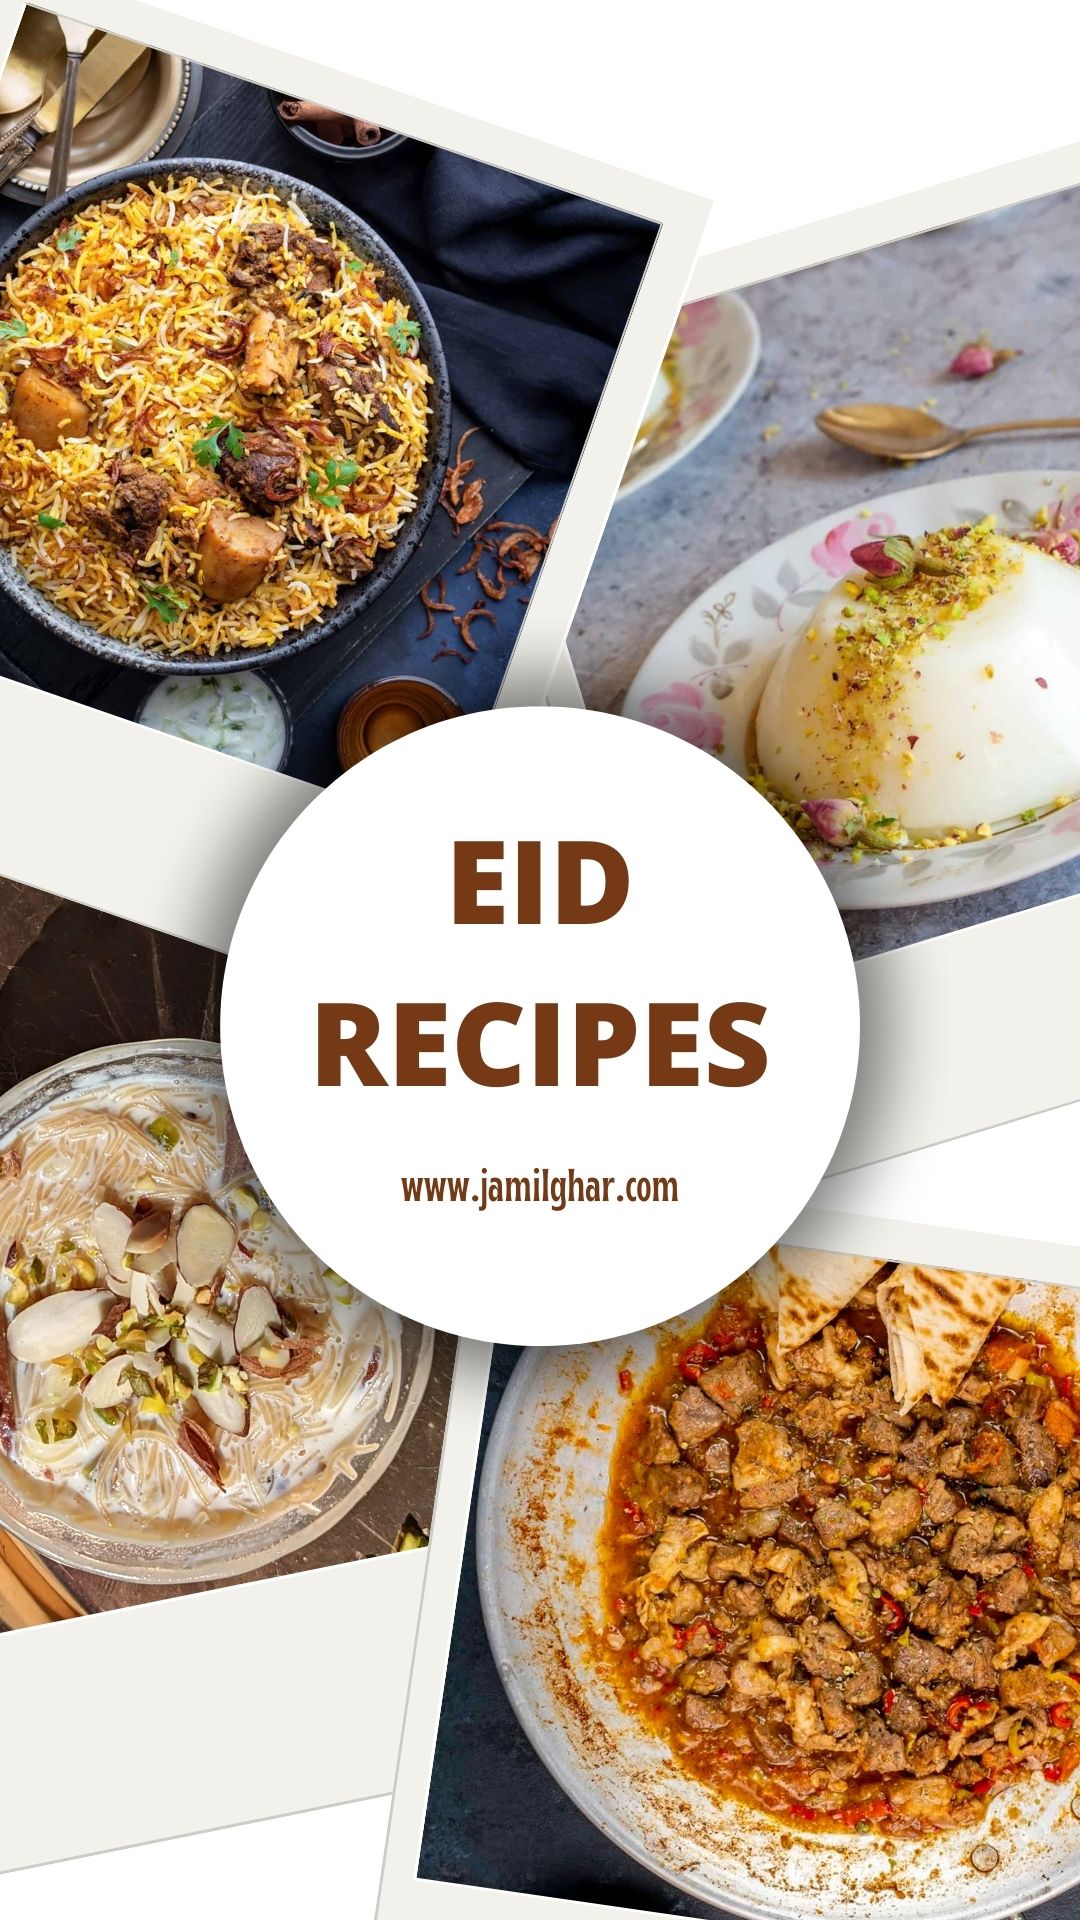 Cover Photo with Eid Recipes.